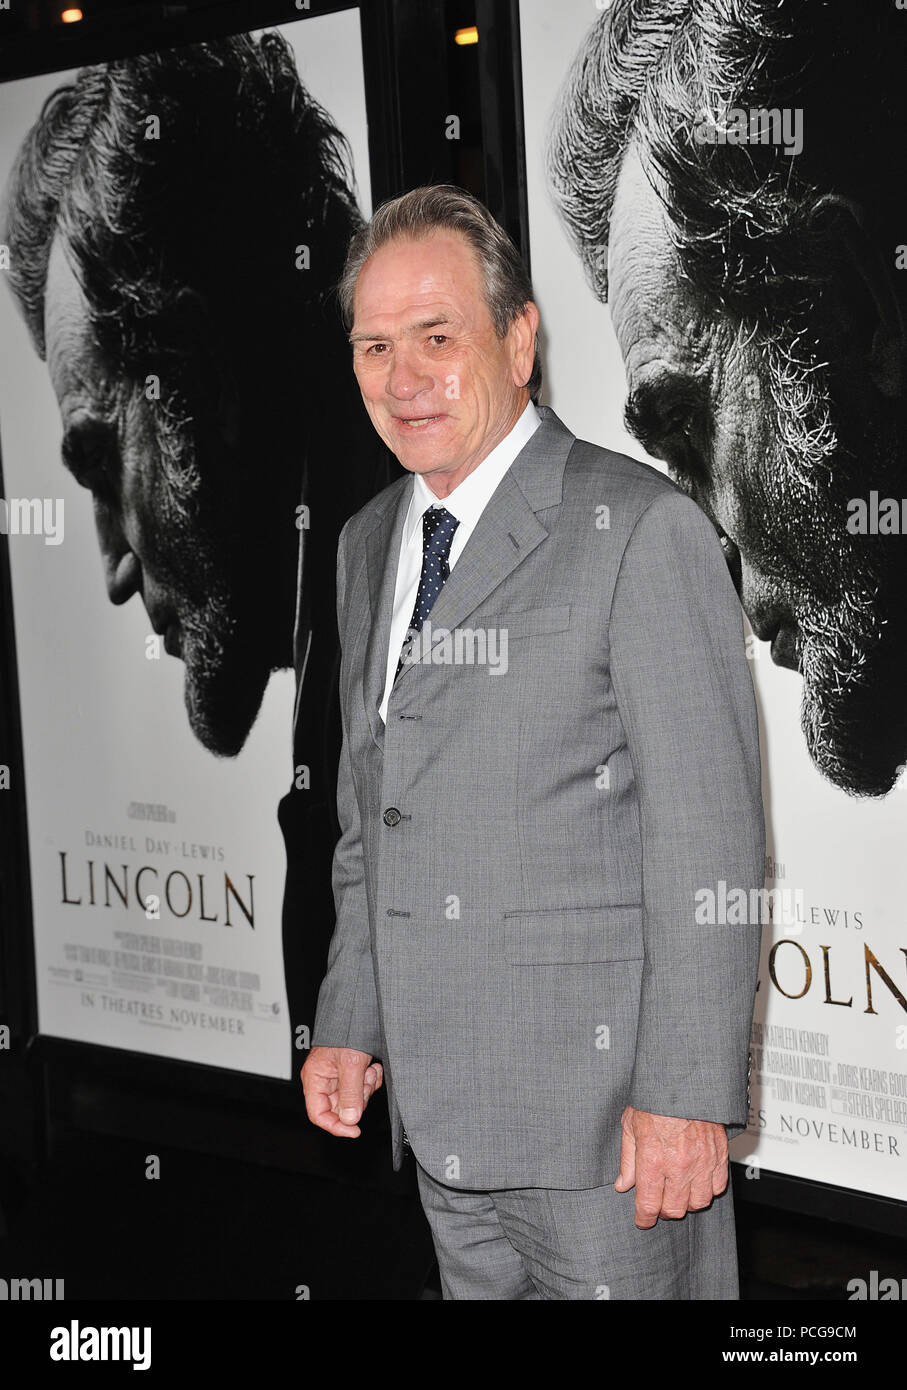 Tommy Lee Jones  at the Lincoln Premiere AFI closing festival Night at the Chinese Theatre In Los Angeles.Tommy Lee Jones  33 ------------- Red Carpet Event, Vertical, USA, Film Industry, Celebrities,  Photography, Bestof, Arts Culture and Entertainment, Topix Celebrities fashion /  Vertical, Best of, Event in Hollywood Life - California,  Red Carpet and backstage, USA, Film Industry, Celebrities,  movie celebrities, TV celebrities, Music celebrities, Photography, Bestof, Arts Culture and Entertainment,  Topix, Three Quarters, vertical, one person,, from the year , 2012, inquiry tsuni@Gamma-US Stock Photo